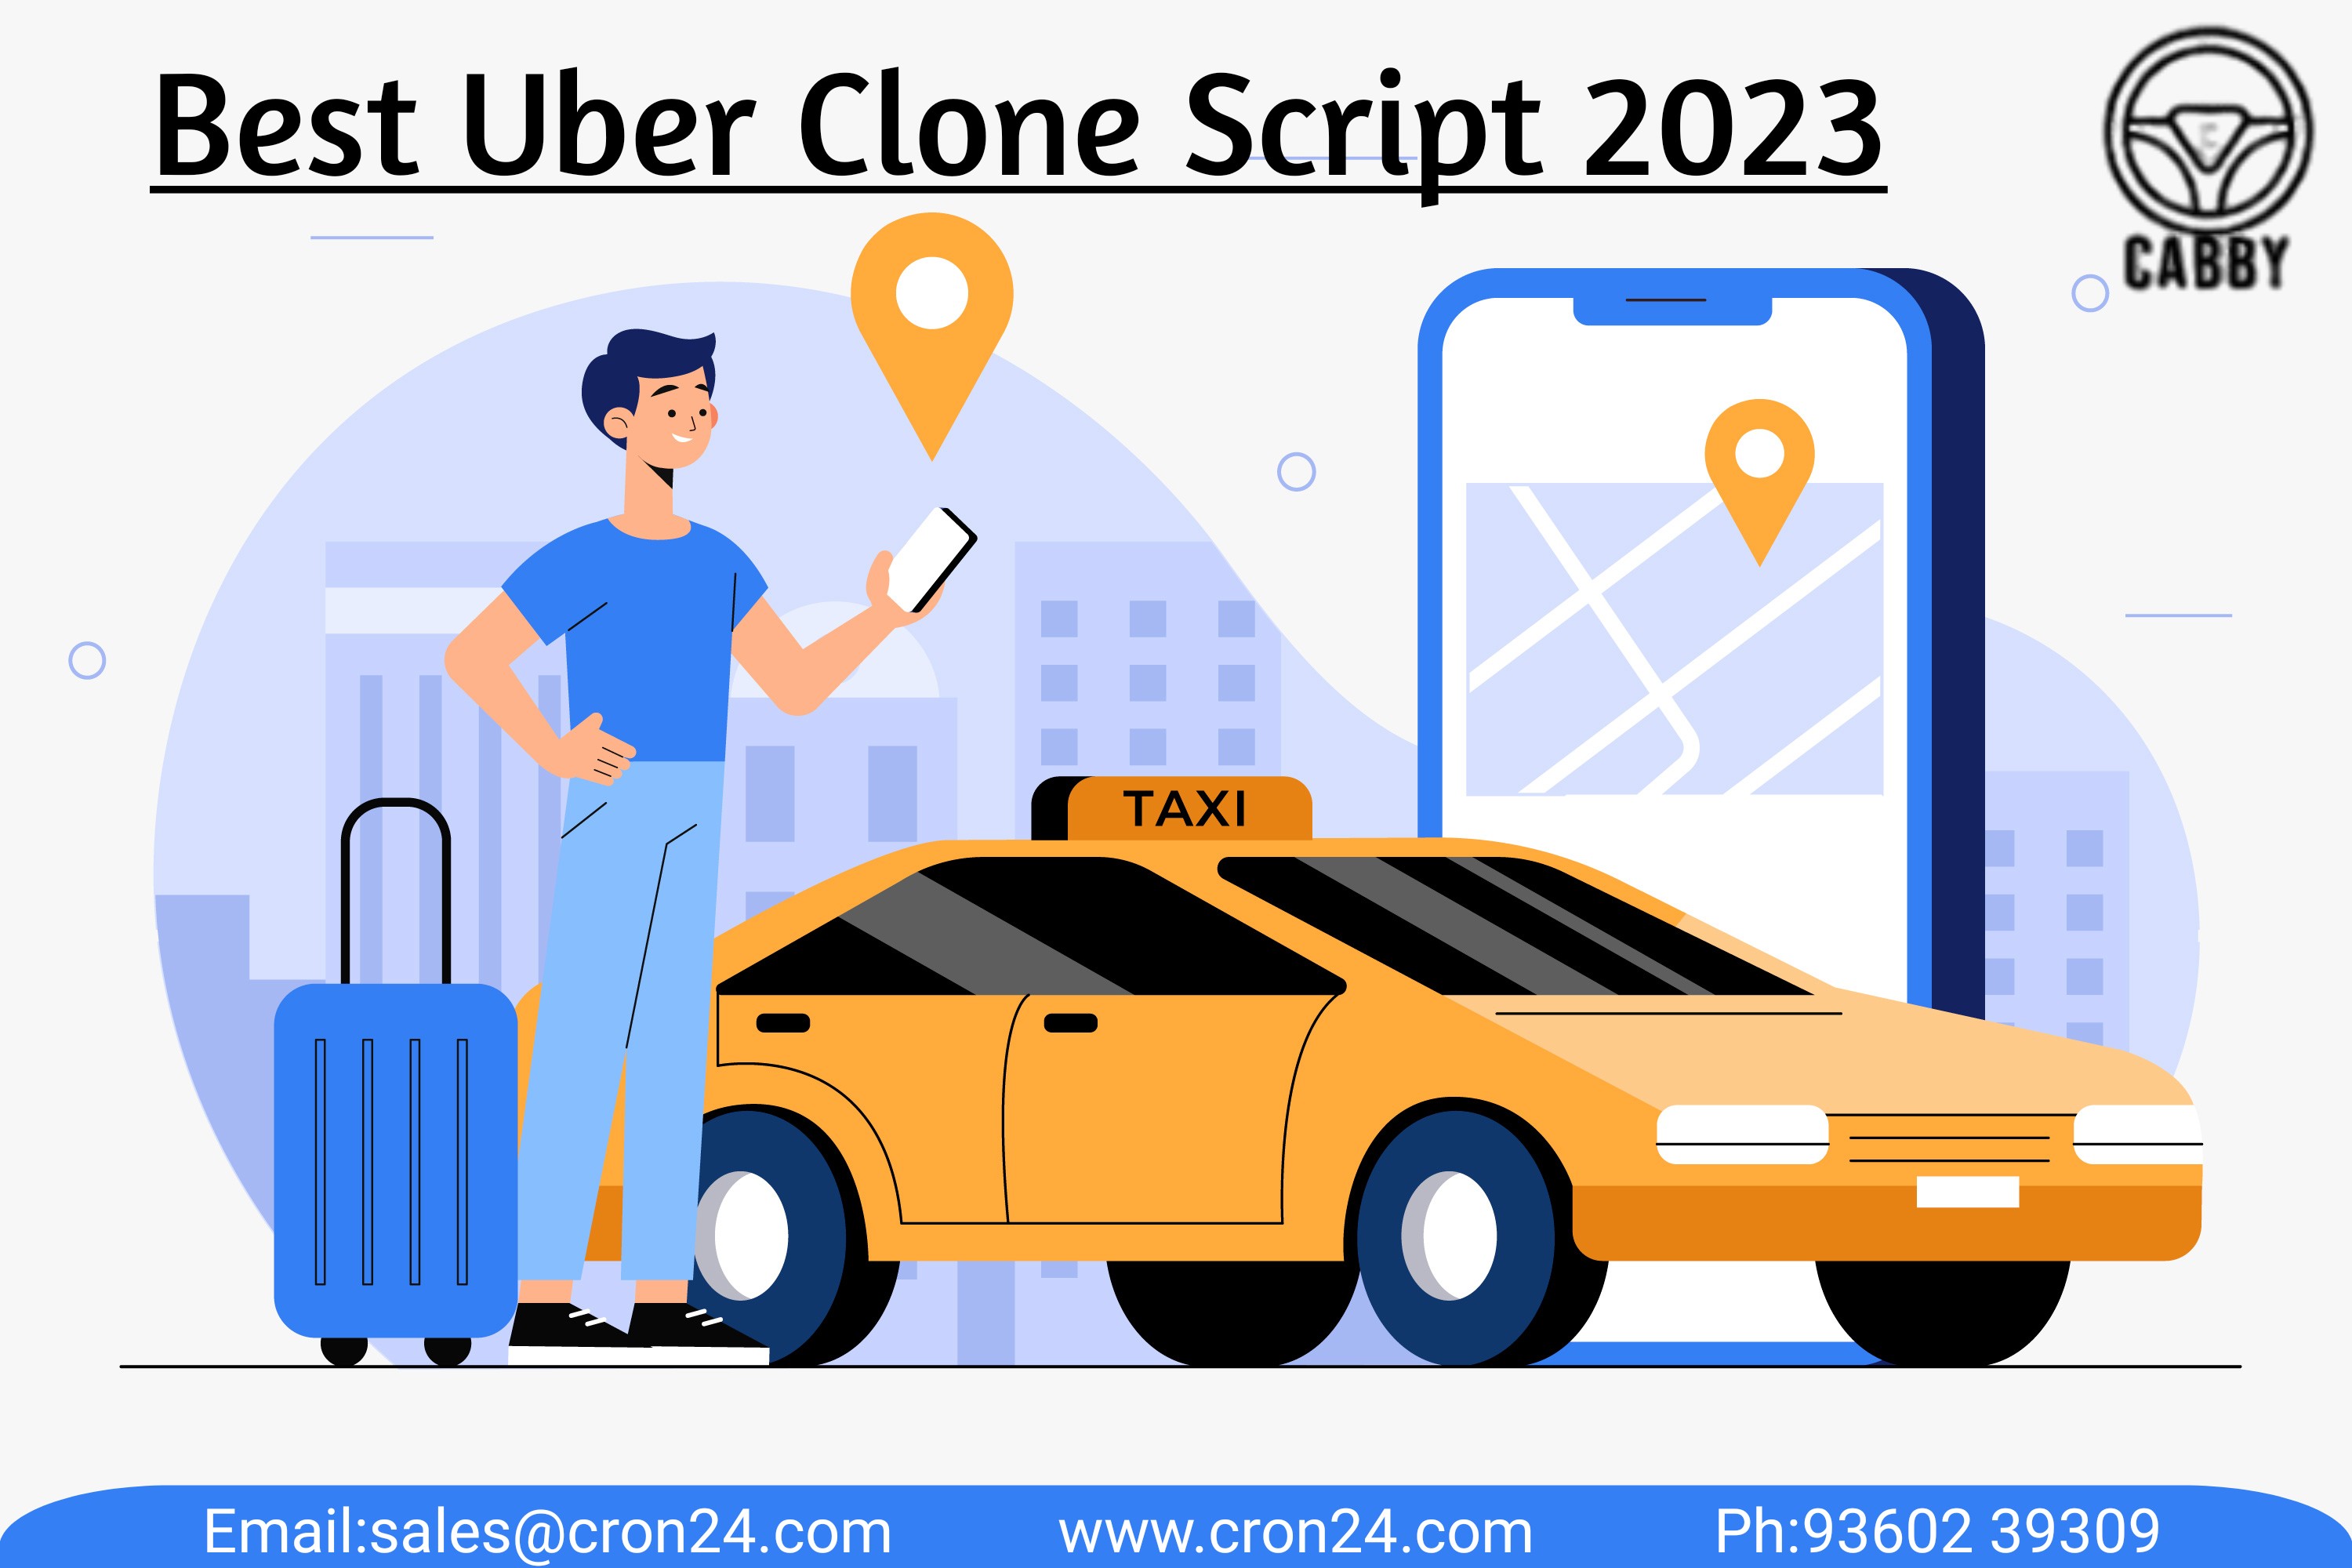 What is the best uber clone script in 2023?